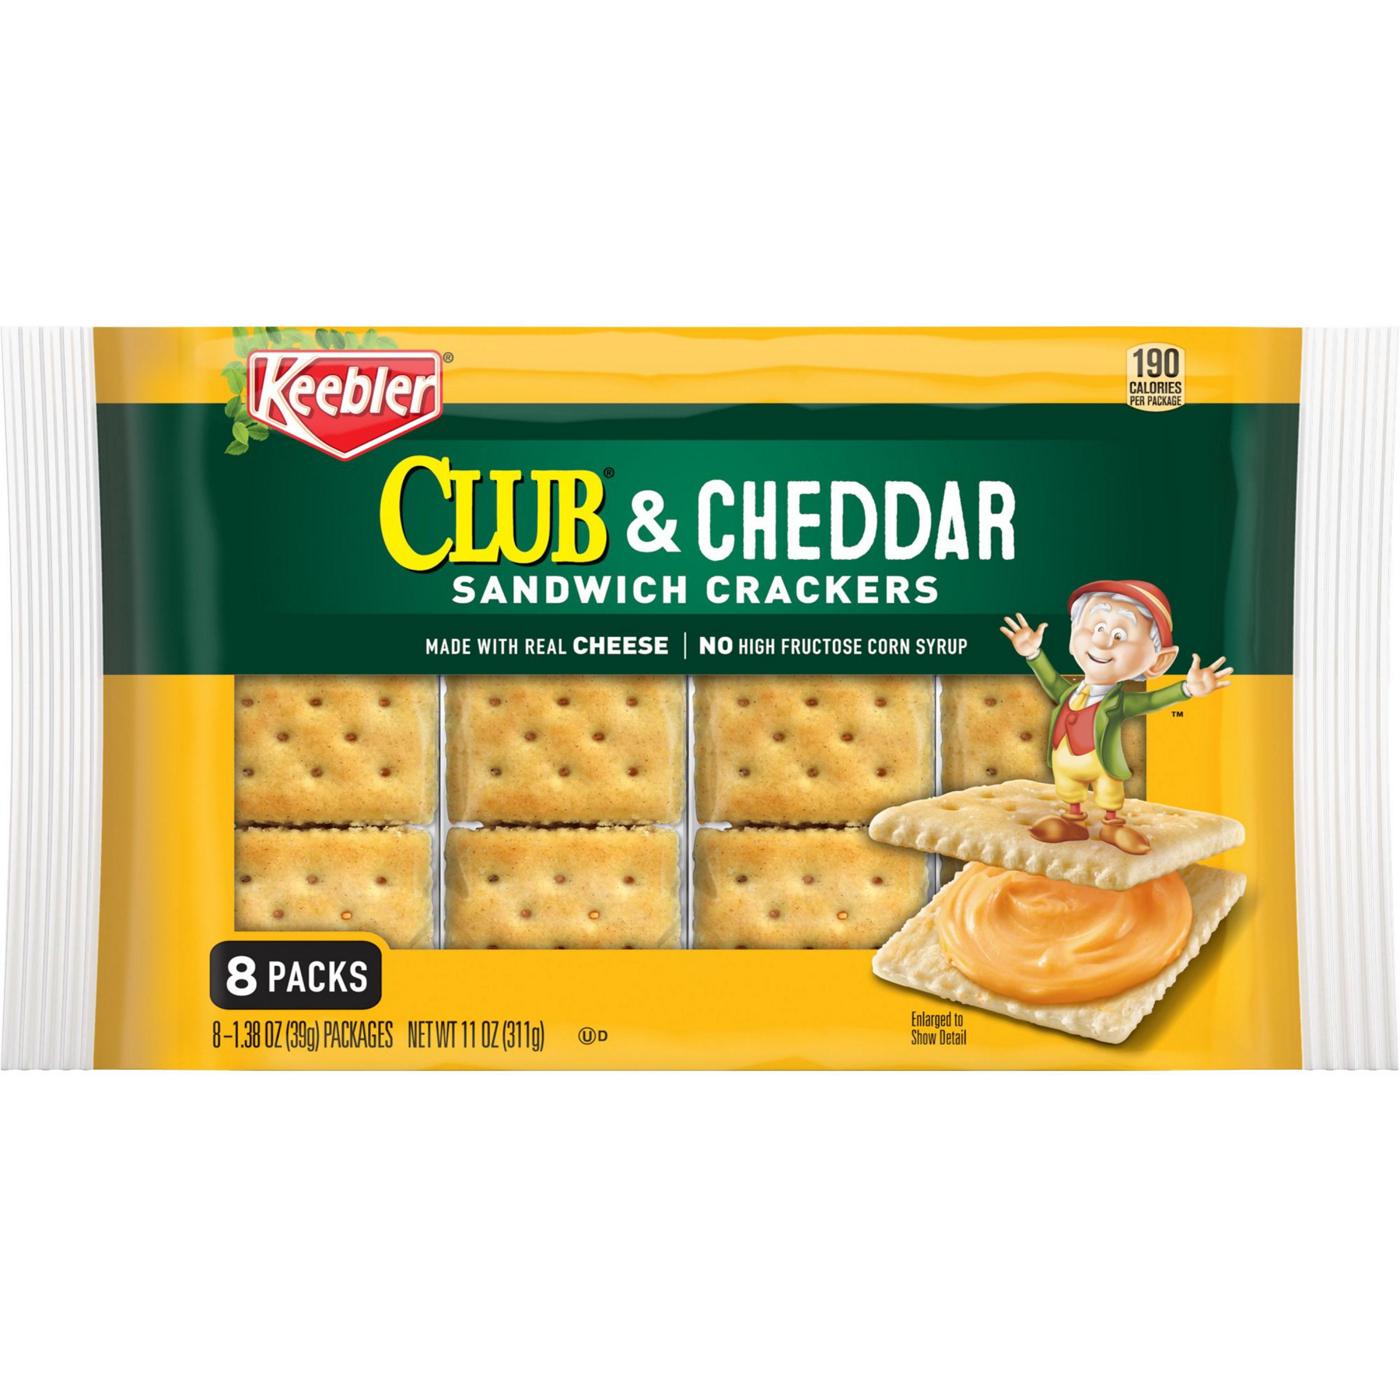 Keebler Club and Cheddar Sandwich Crackers; image 1 of 3